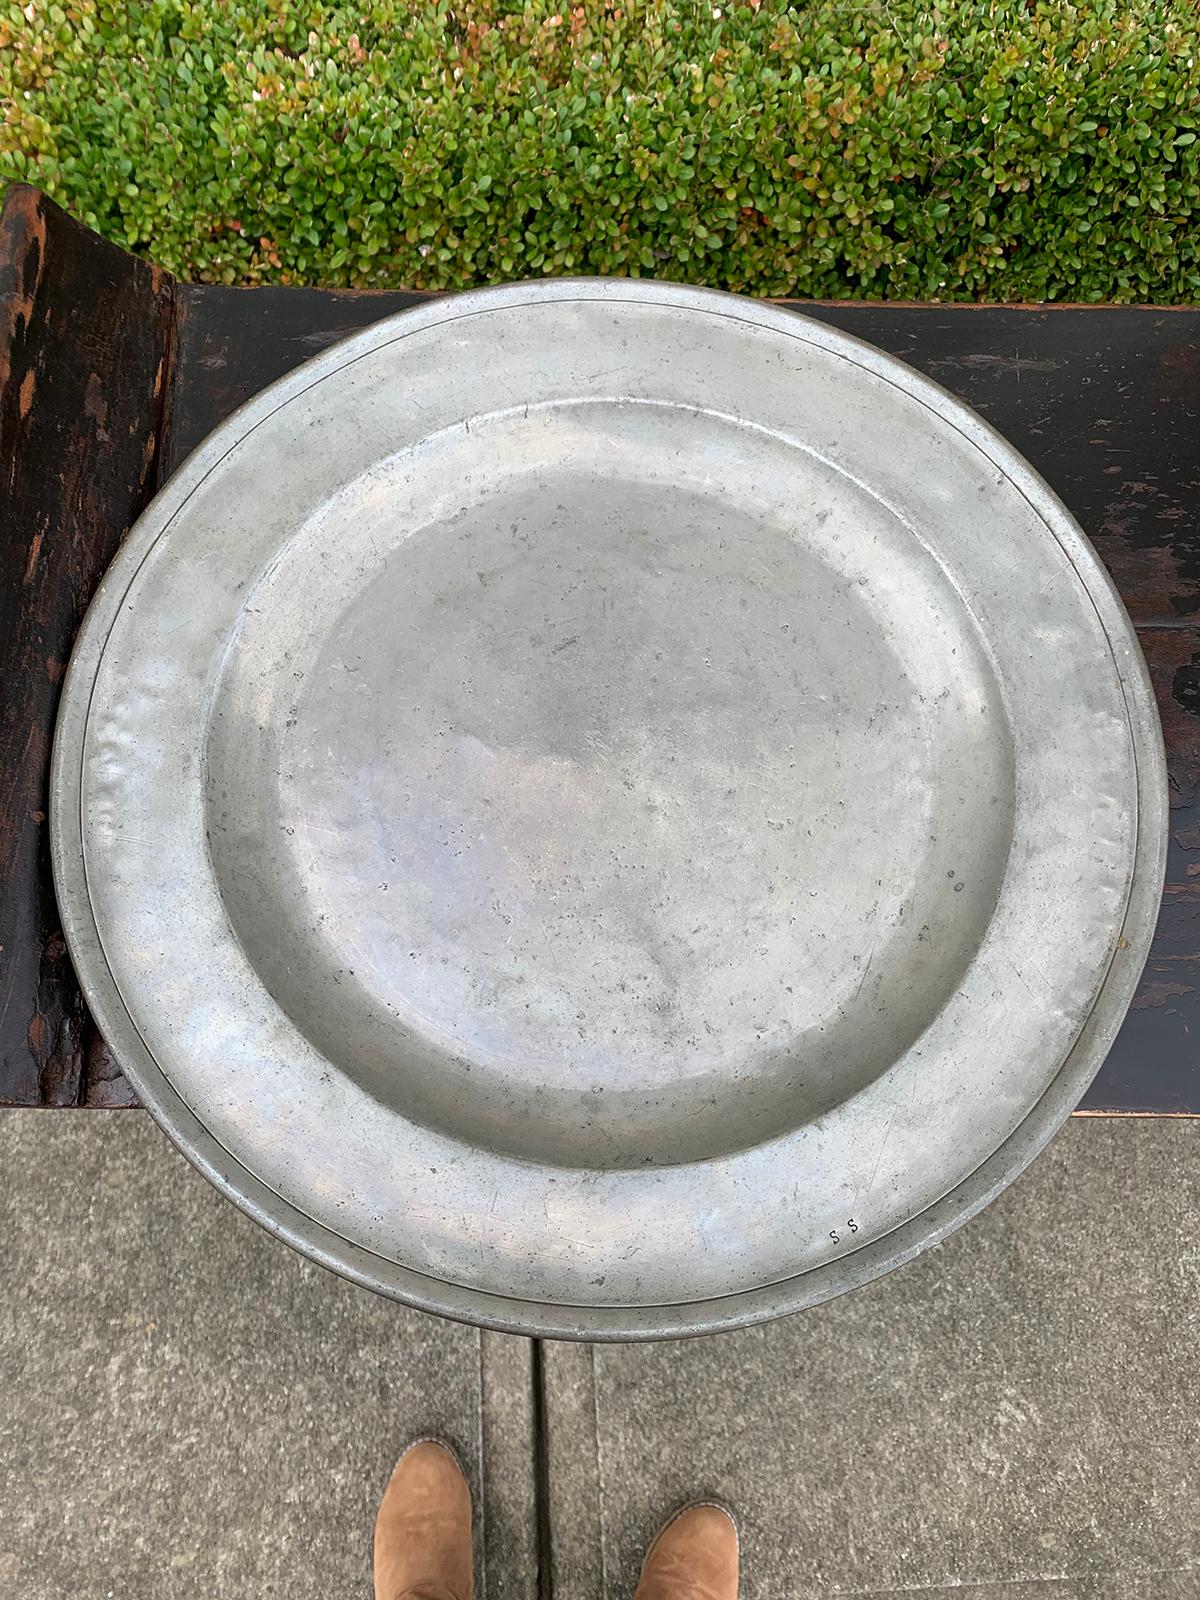 American Pewter charger, circa 1760-1840, marked SS.